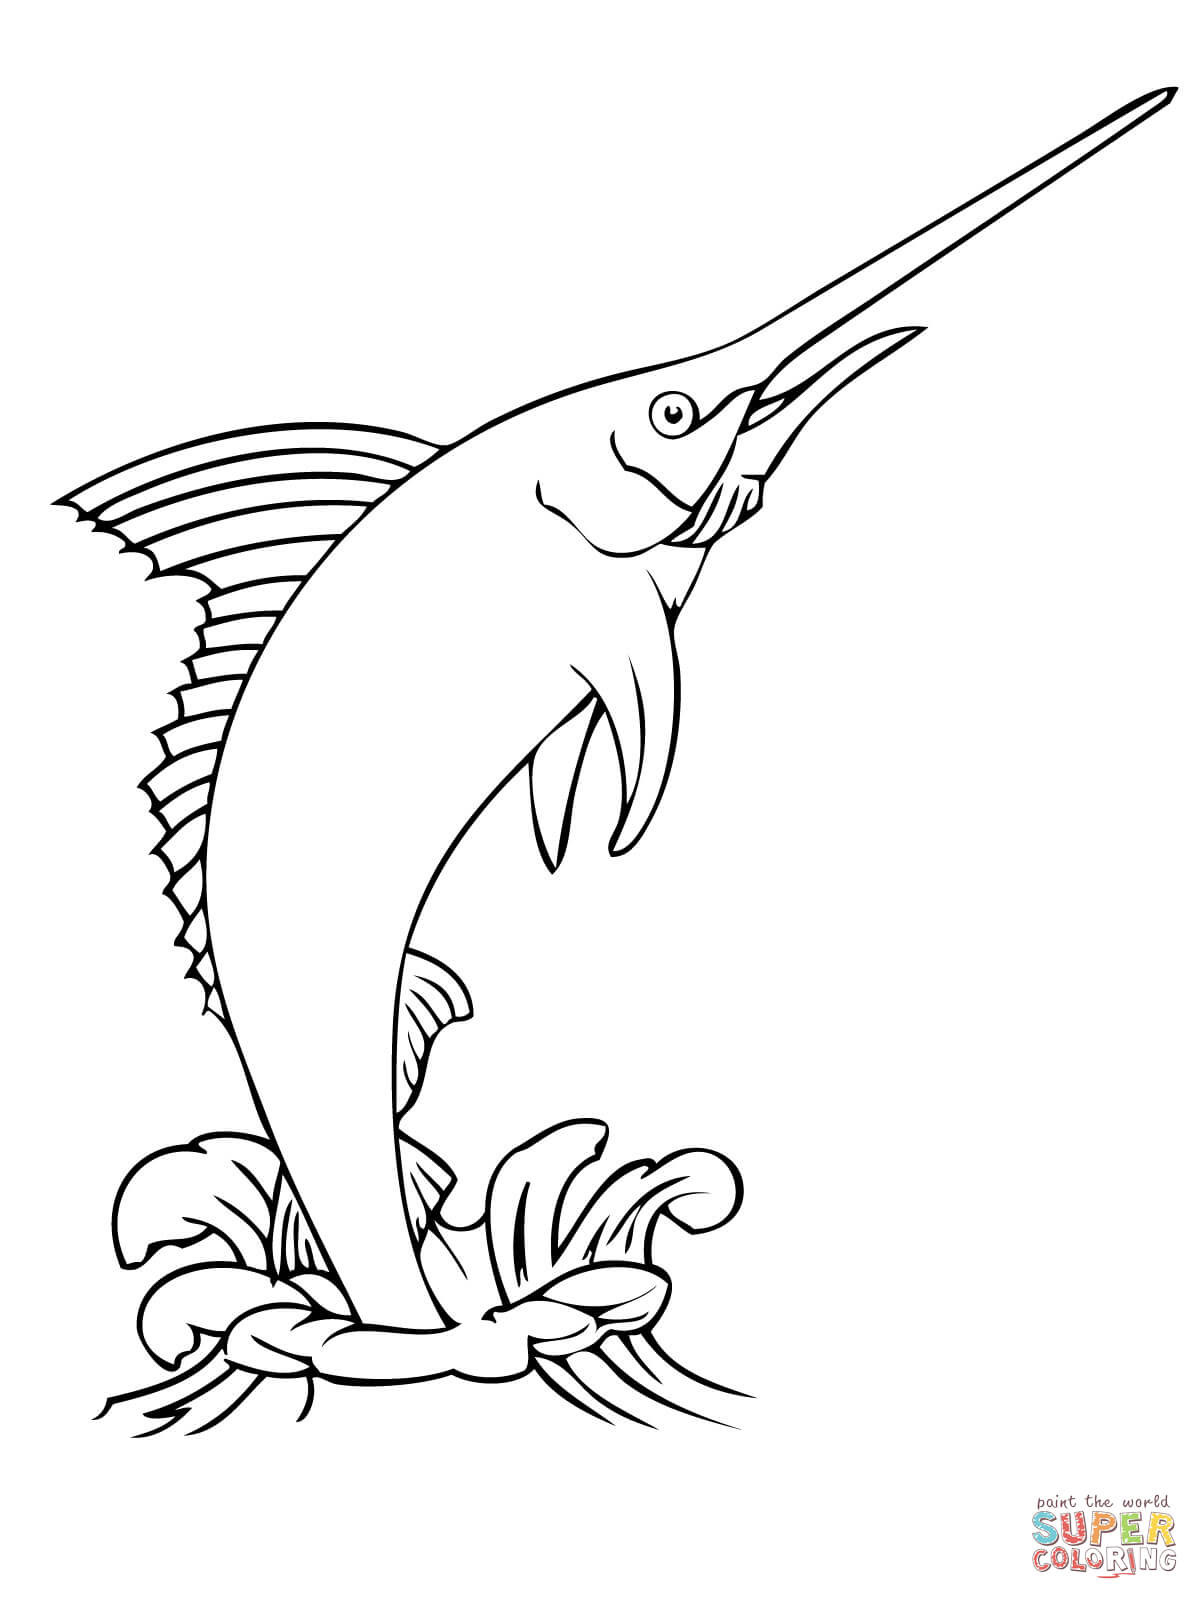 Marlin Fish coloring page | Free Printable Coloring Pages